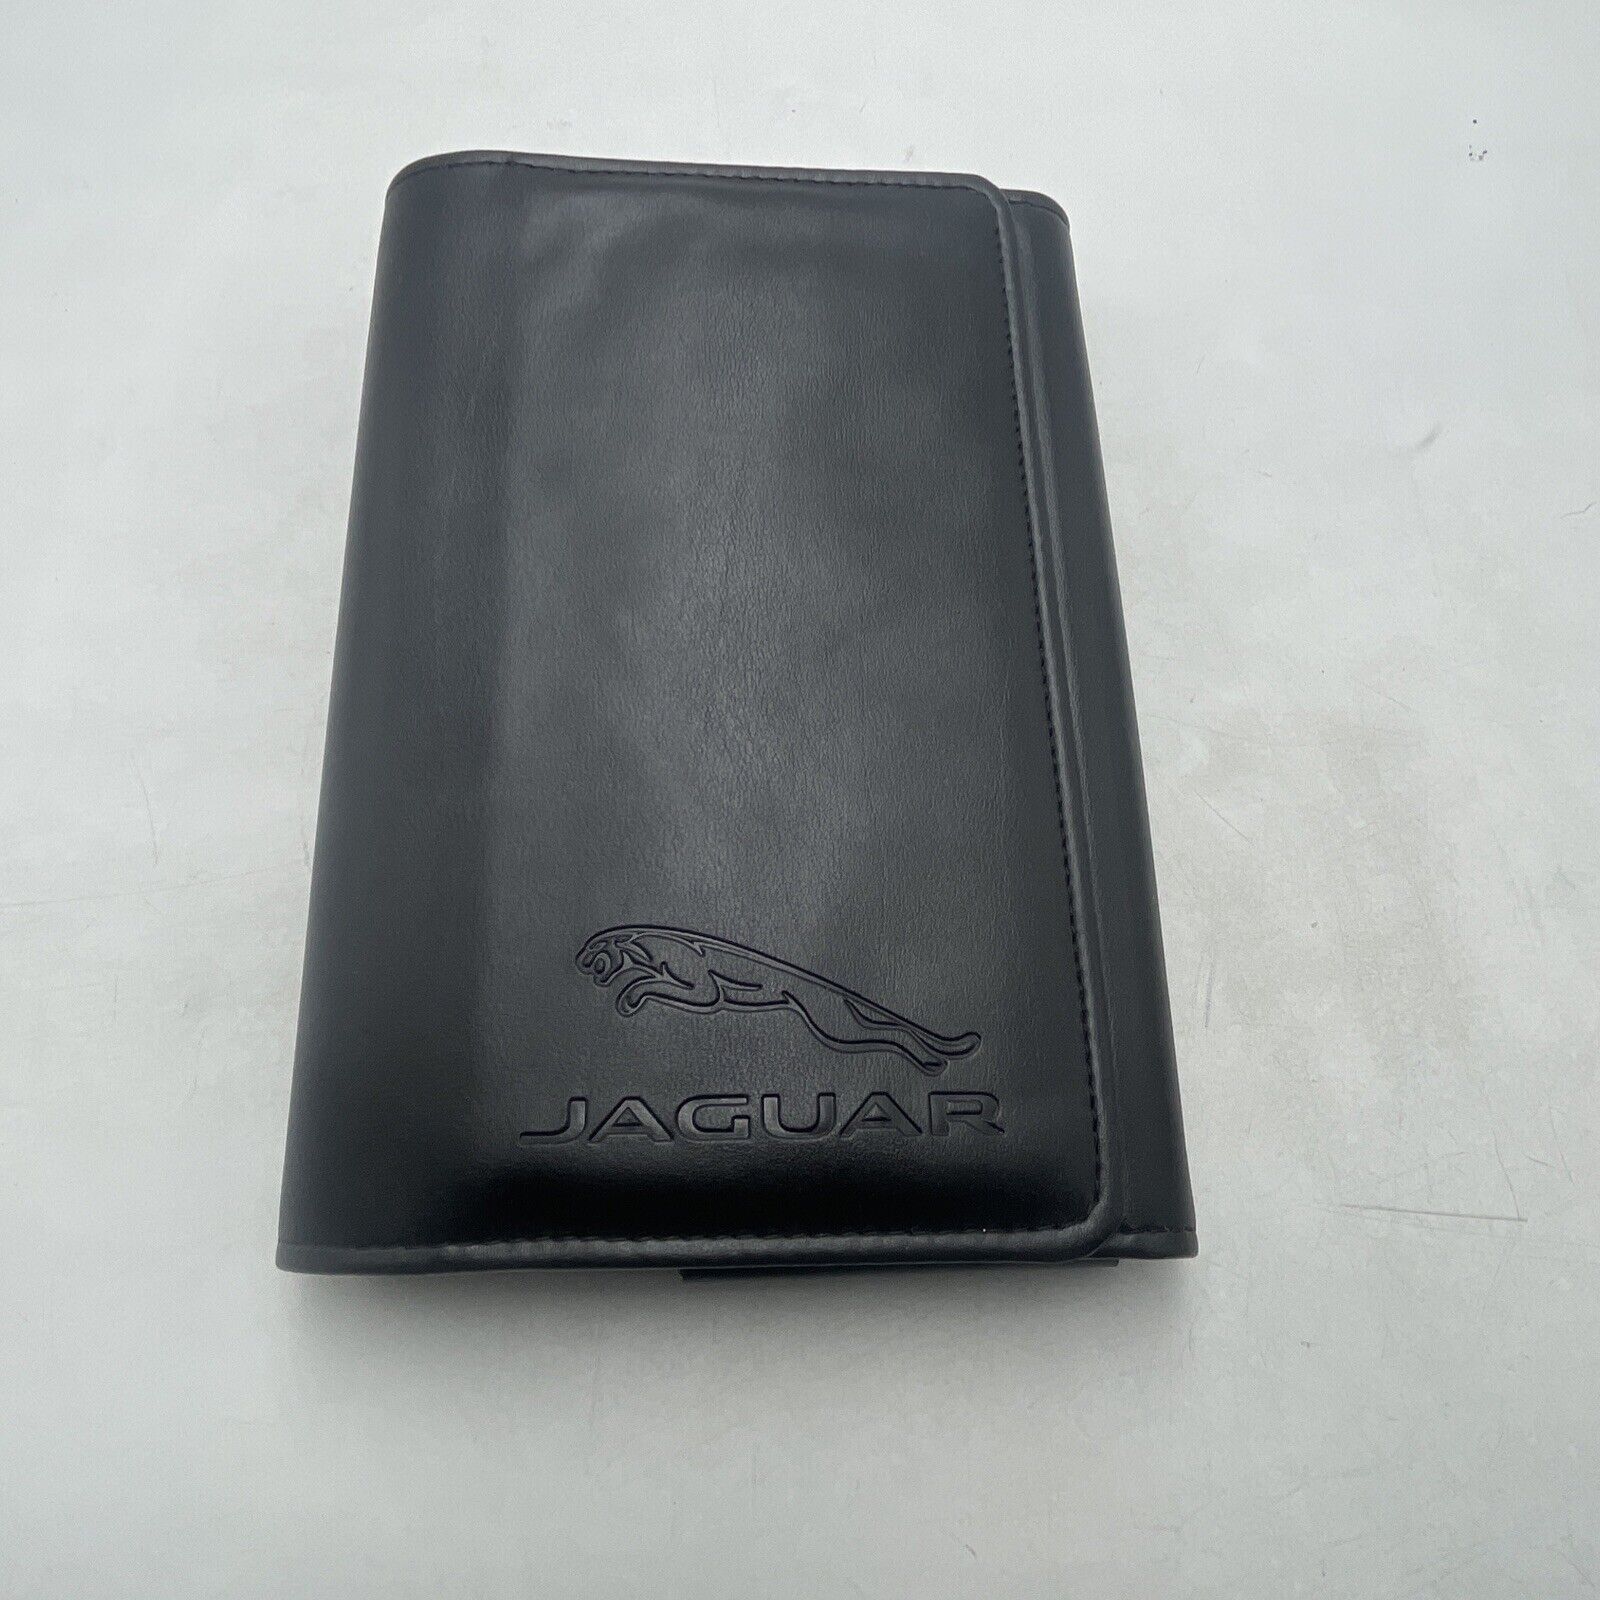 JAGUAR LEATHER CASE FOR OWNERS MANUAL OPERATORS USER GUIDE WALLET